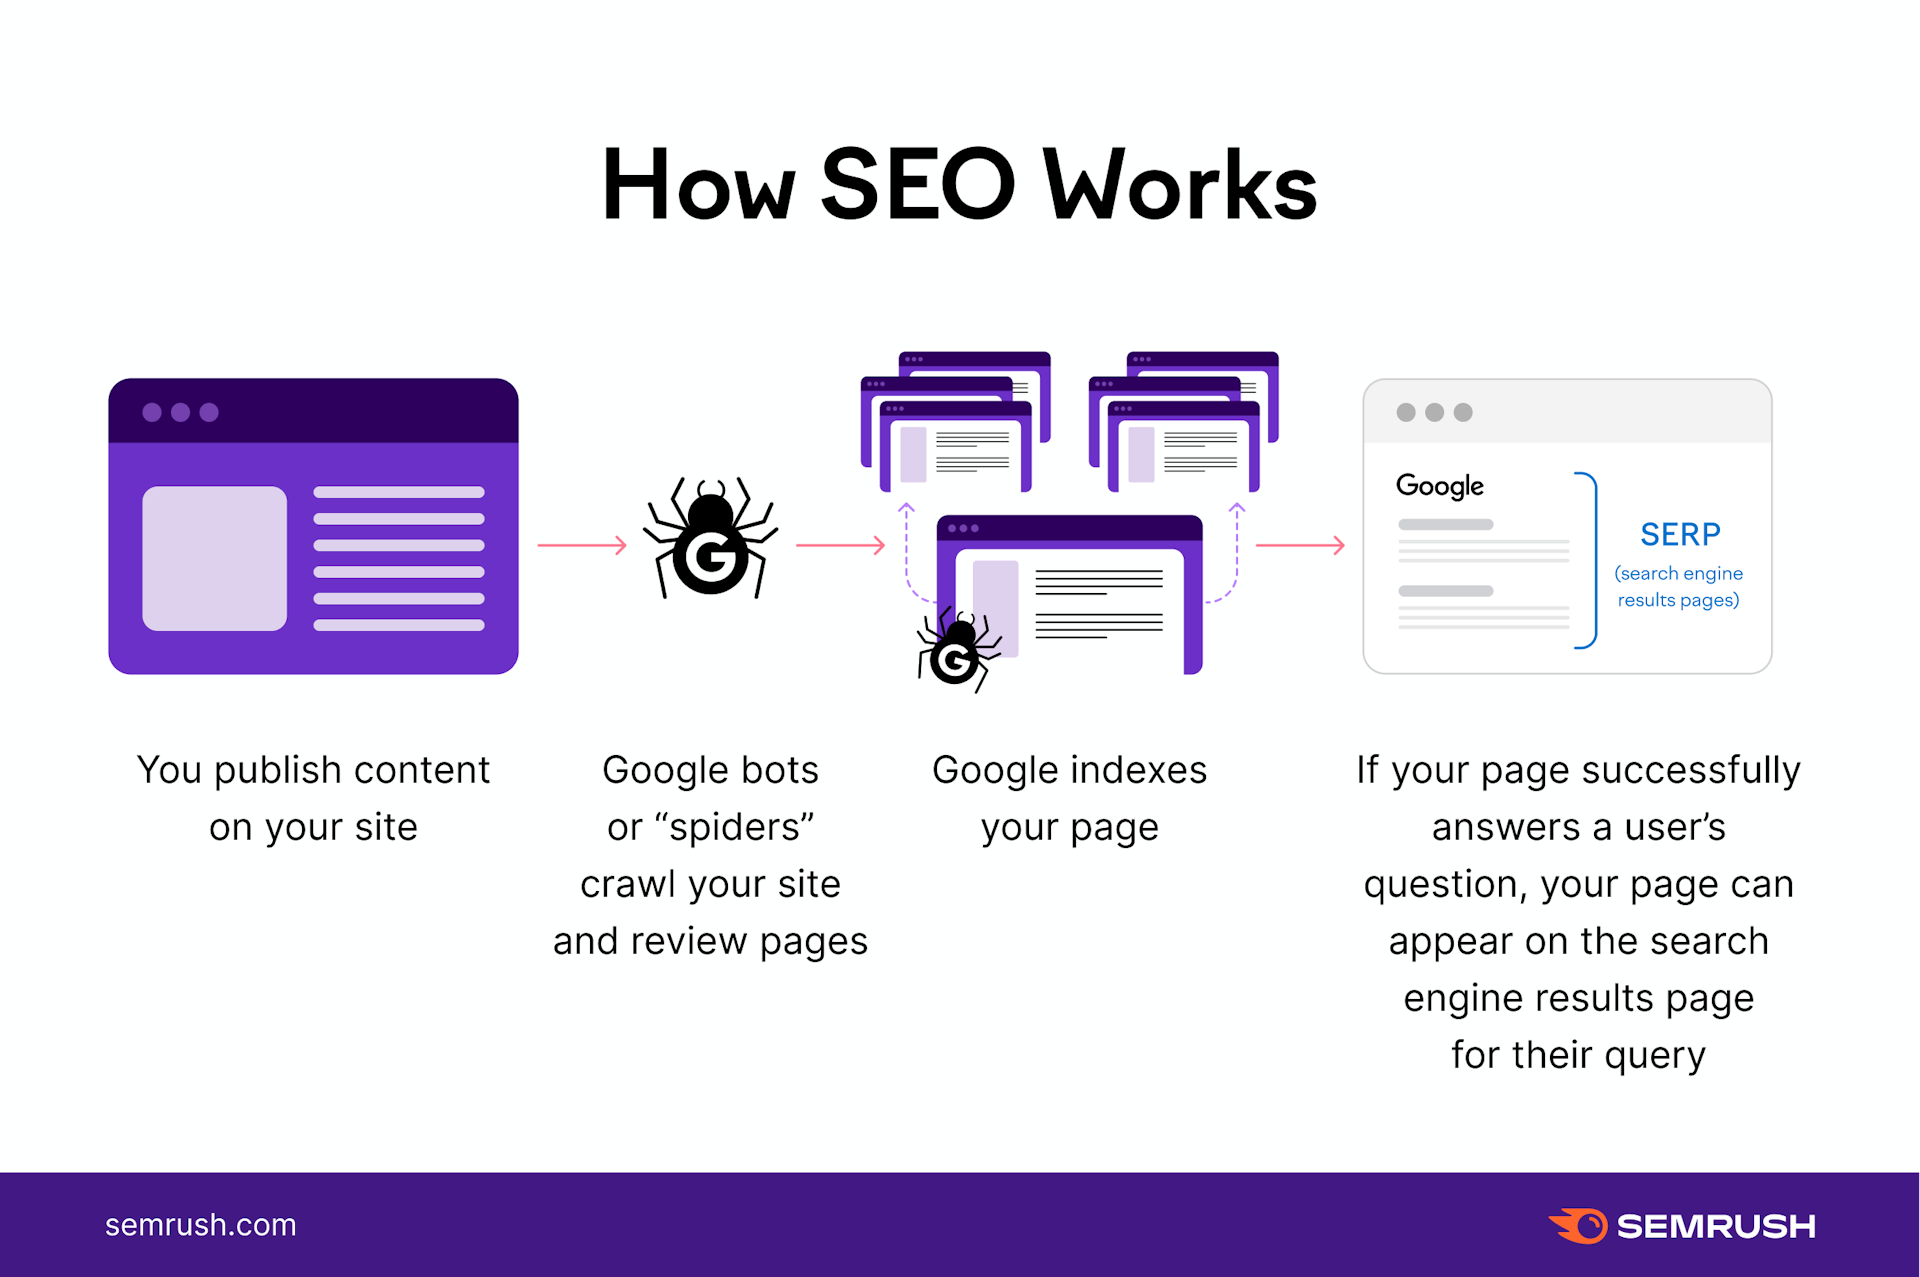 How SEO works and how Google bots index your pages